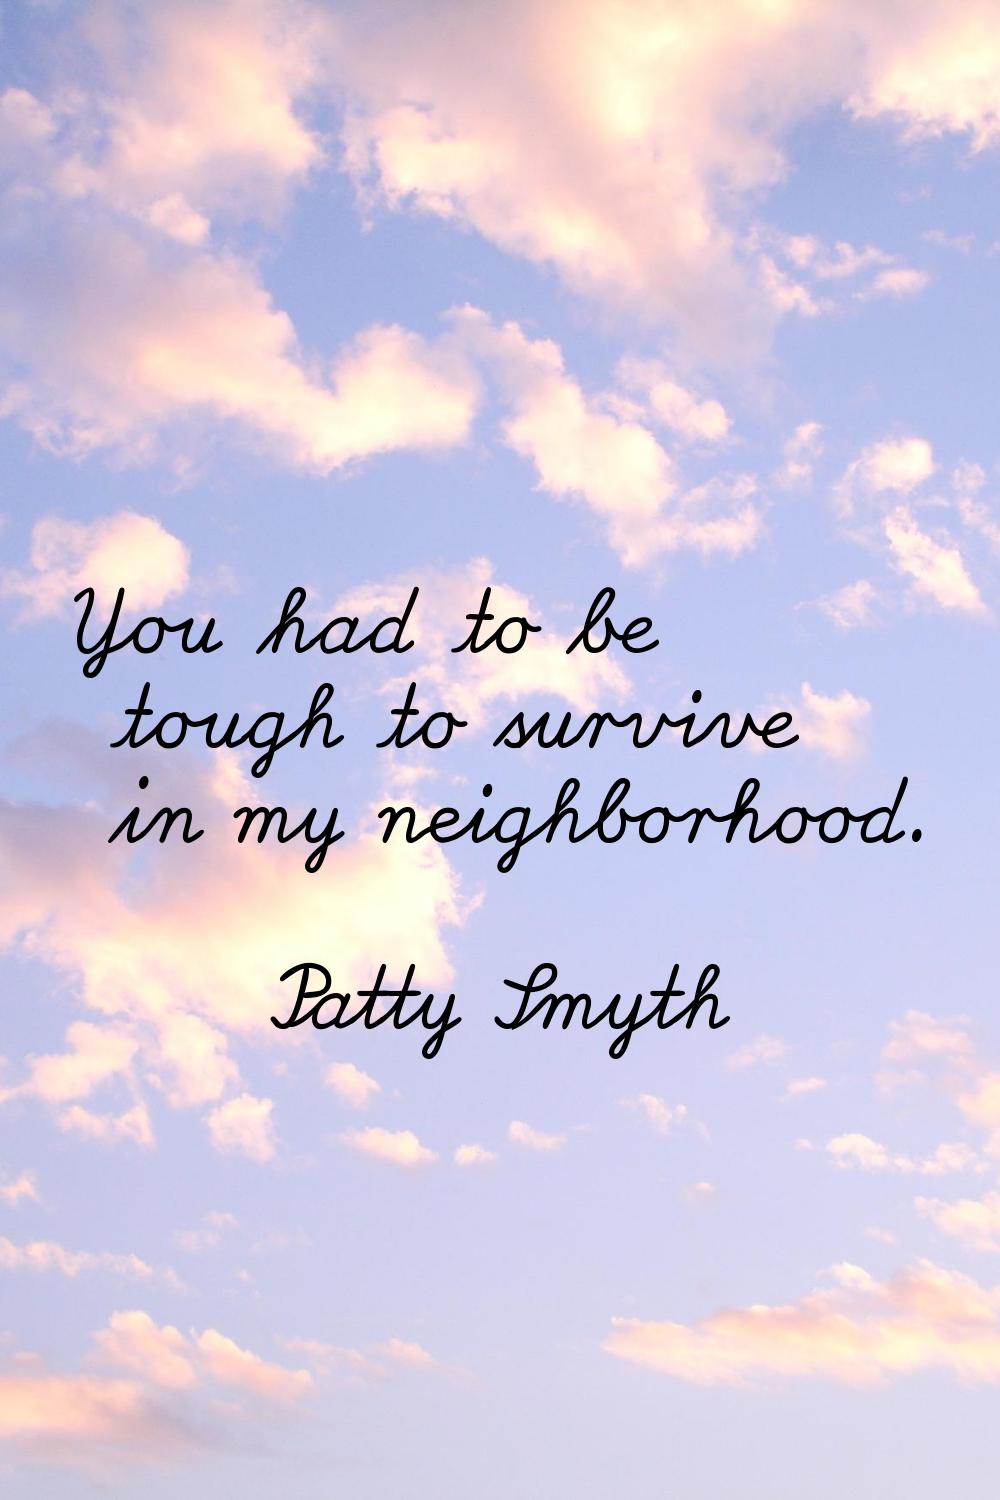 You had to be tough to survive in my neighborhood.